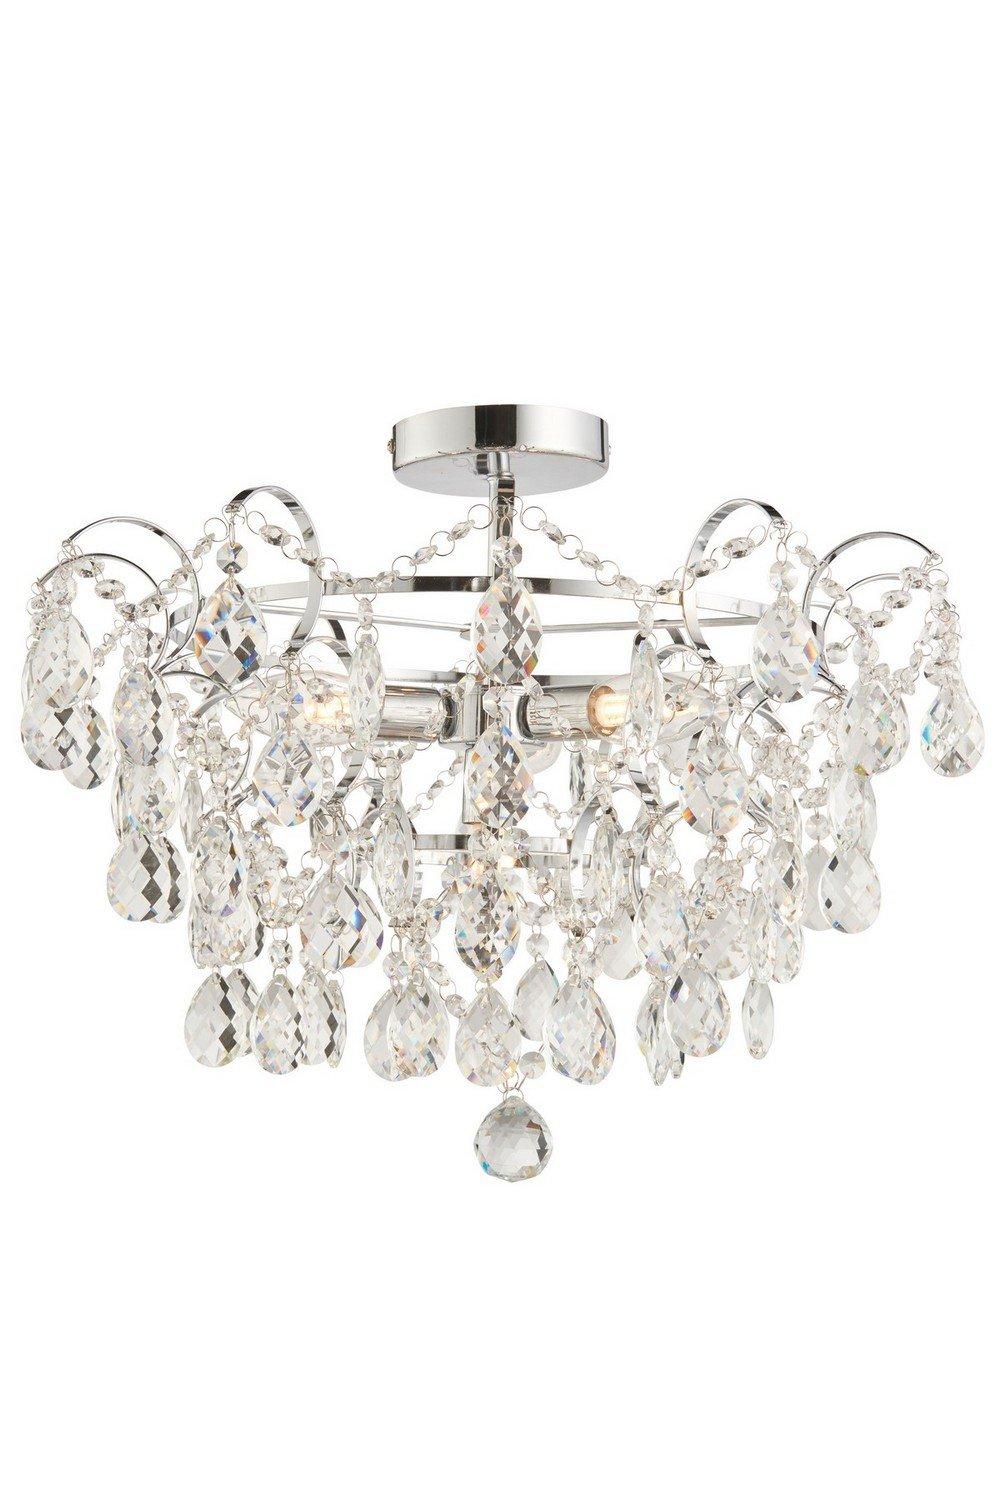 Alisona Elegant Decorative Bathroom Semi Flush 4 Light Chandelier Chrome Plated with Clear Faceted C